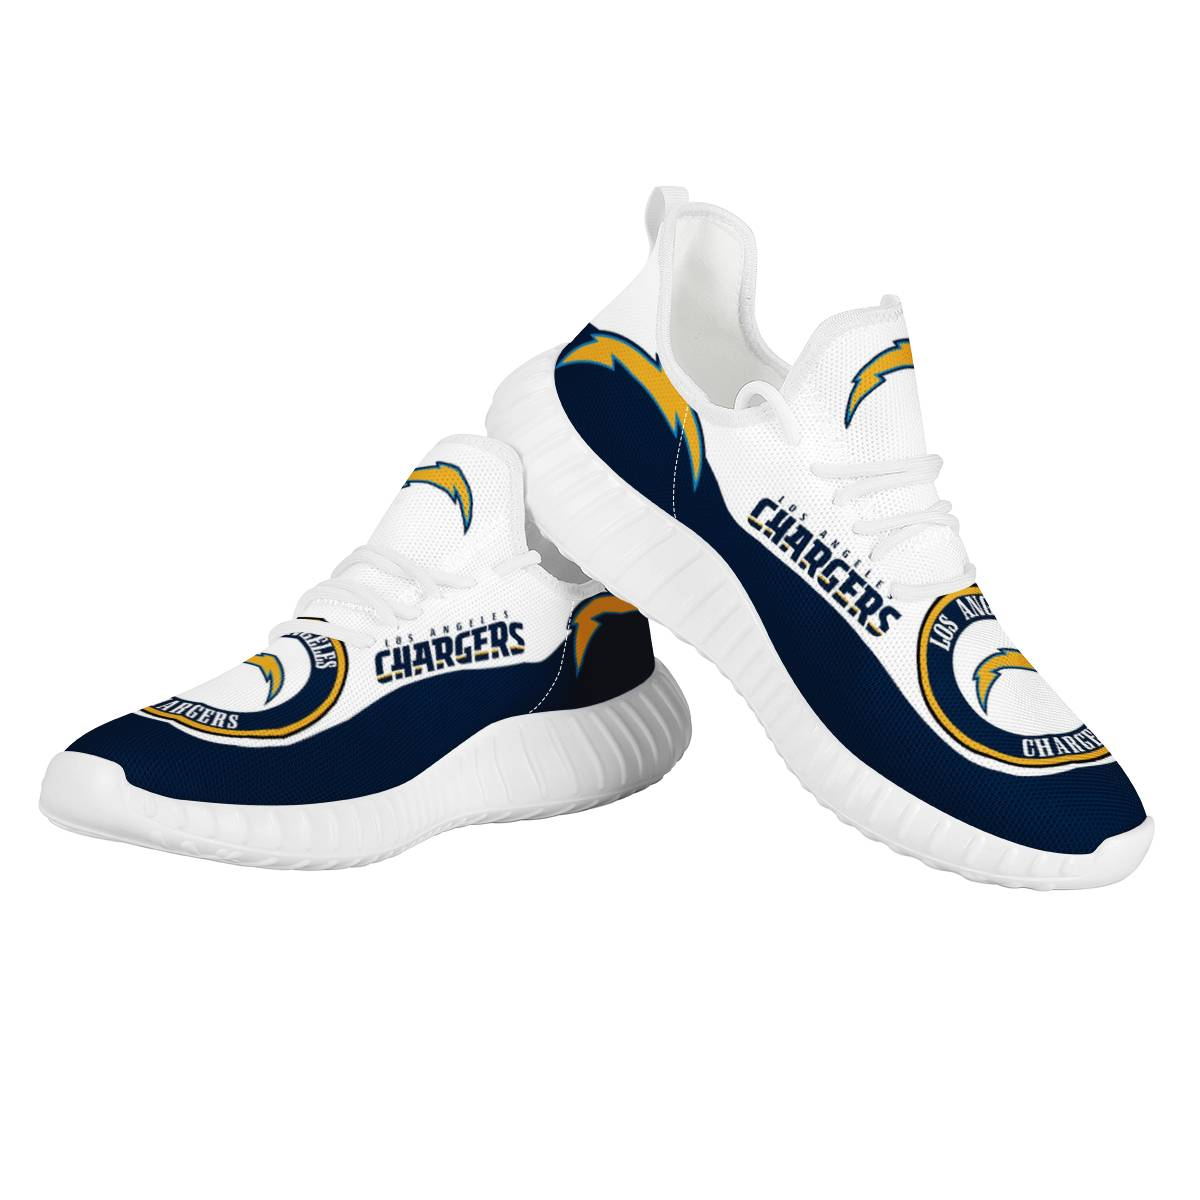 Women's NFL Los Angeles Chargers Mesh Knit Sneakers/Shoes 002